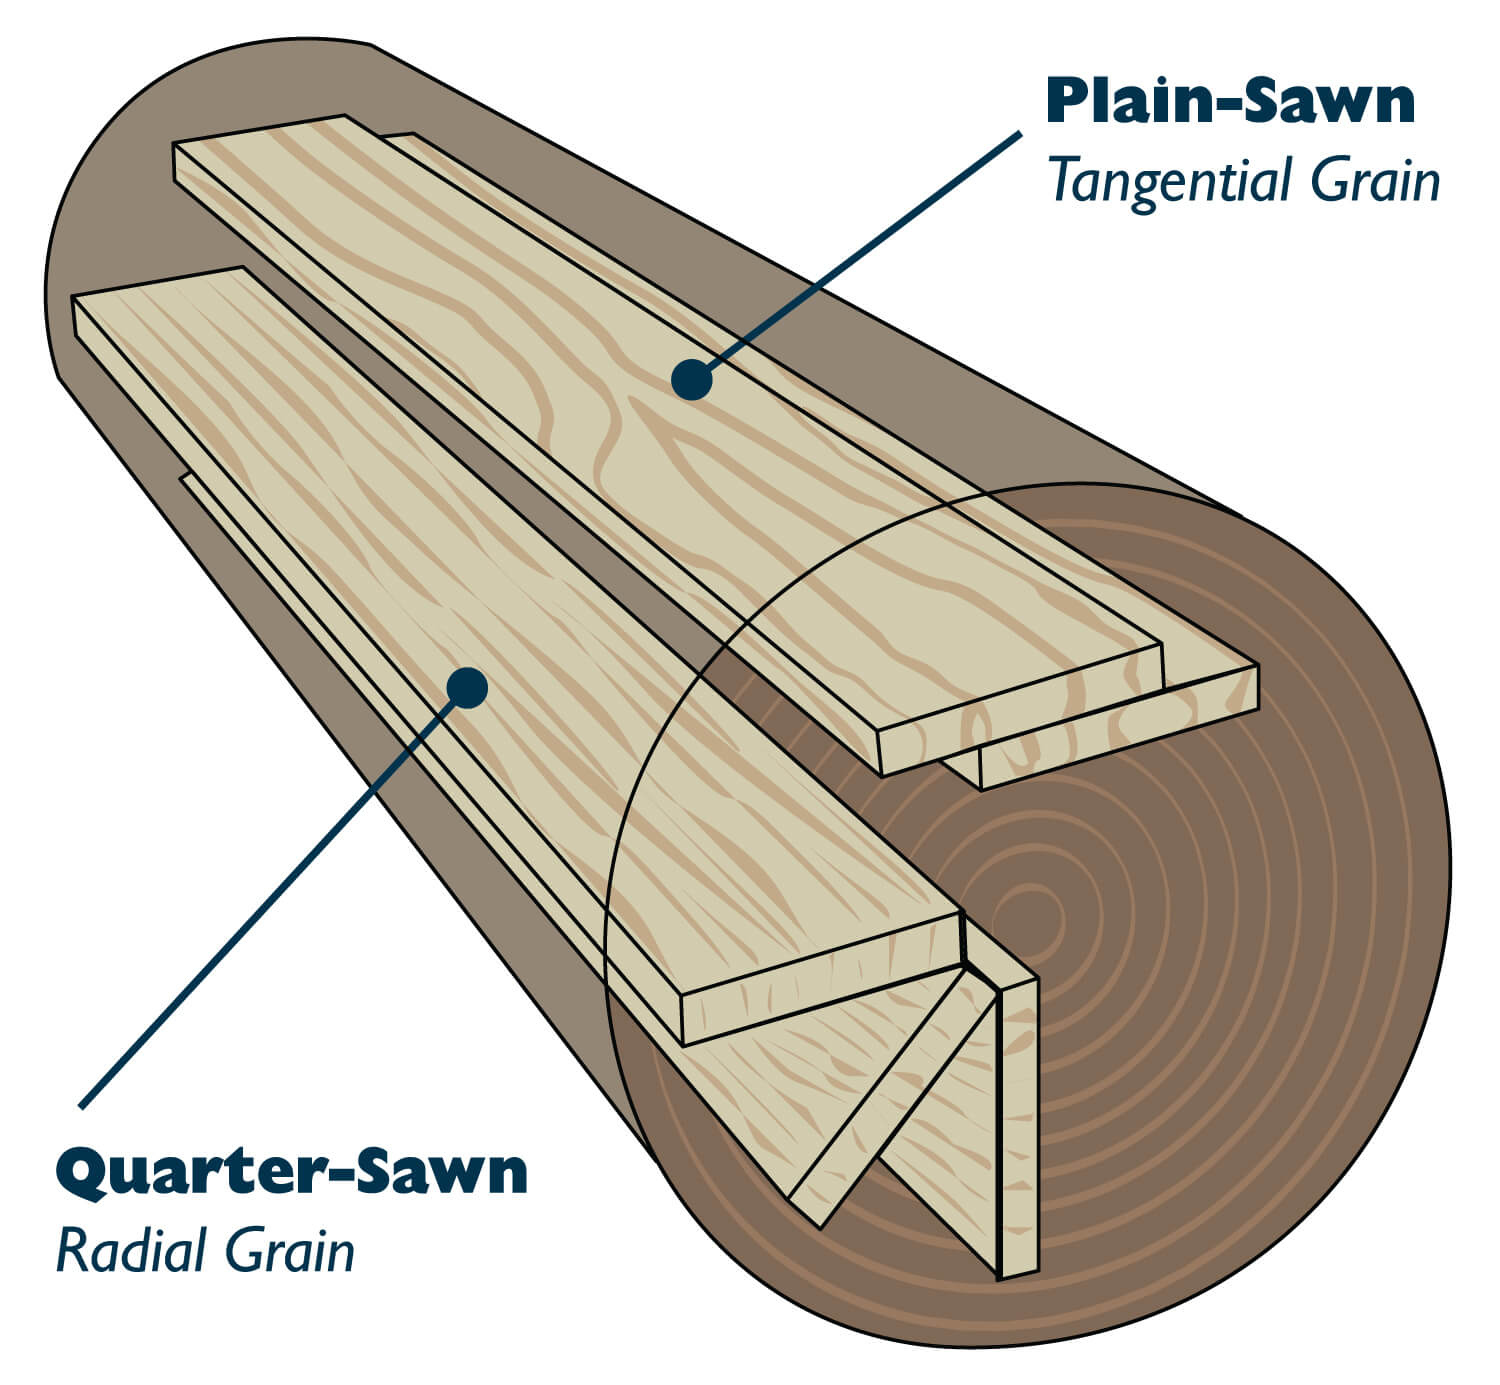 The difference between Quarter-Sawn Oak and Plain Sawn Oak showing a log and where the cuts are made to create the unique grain patterns.